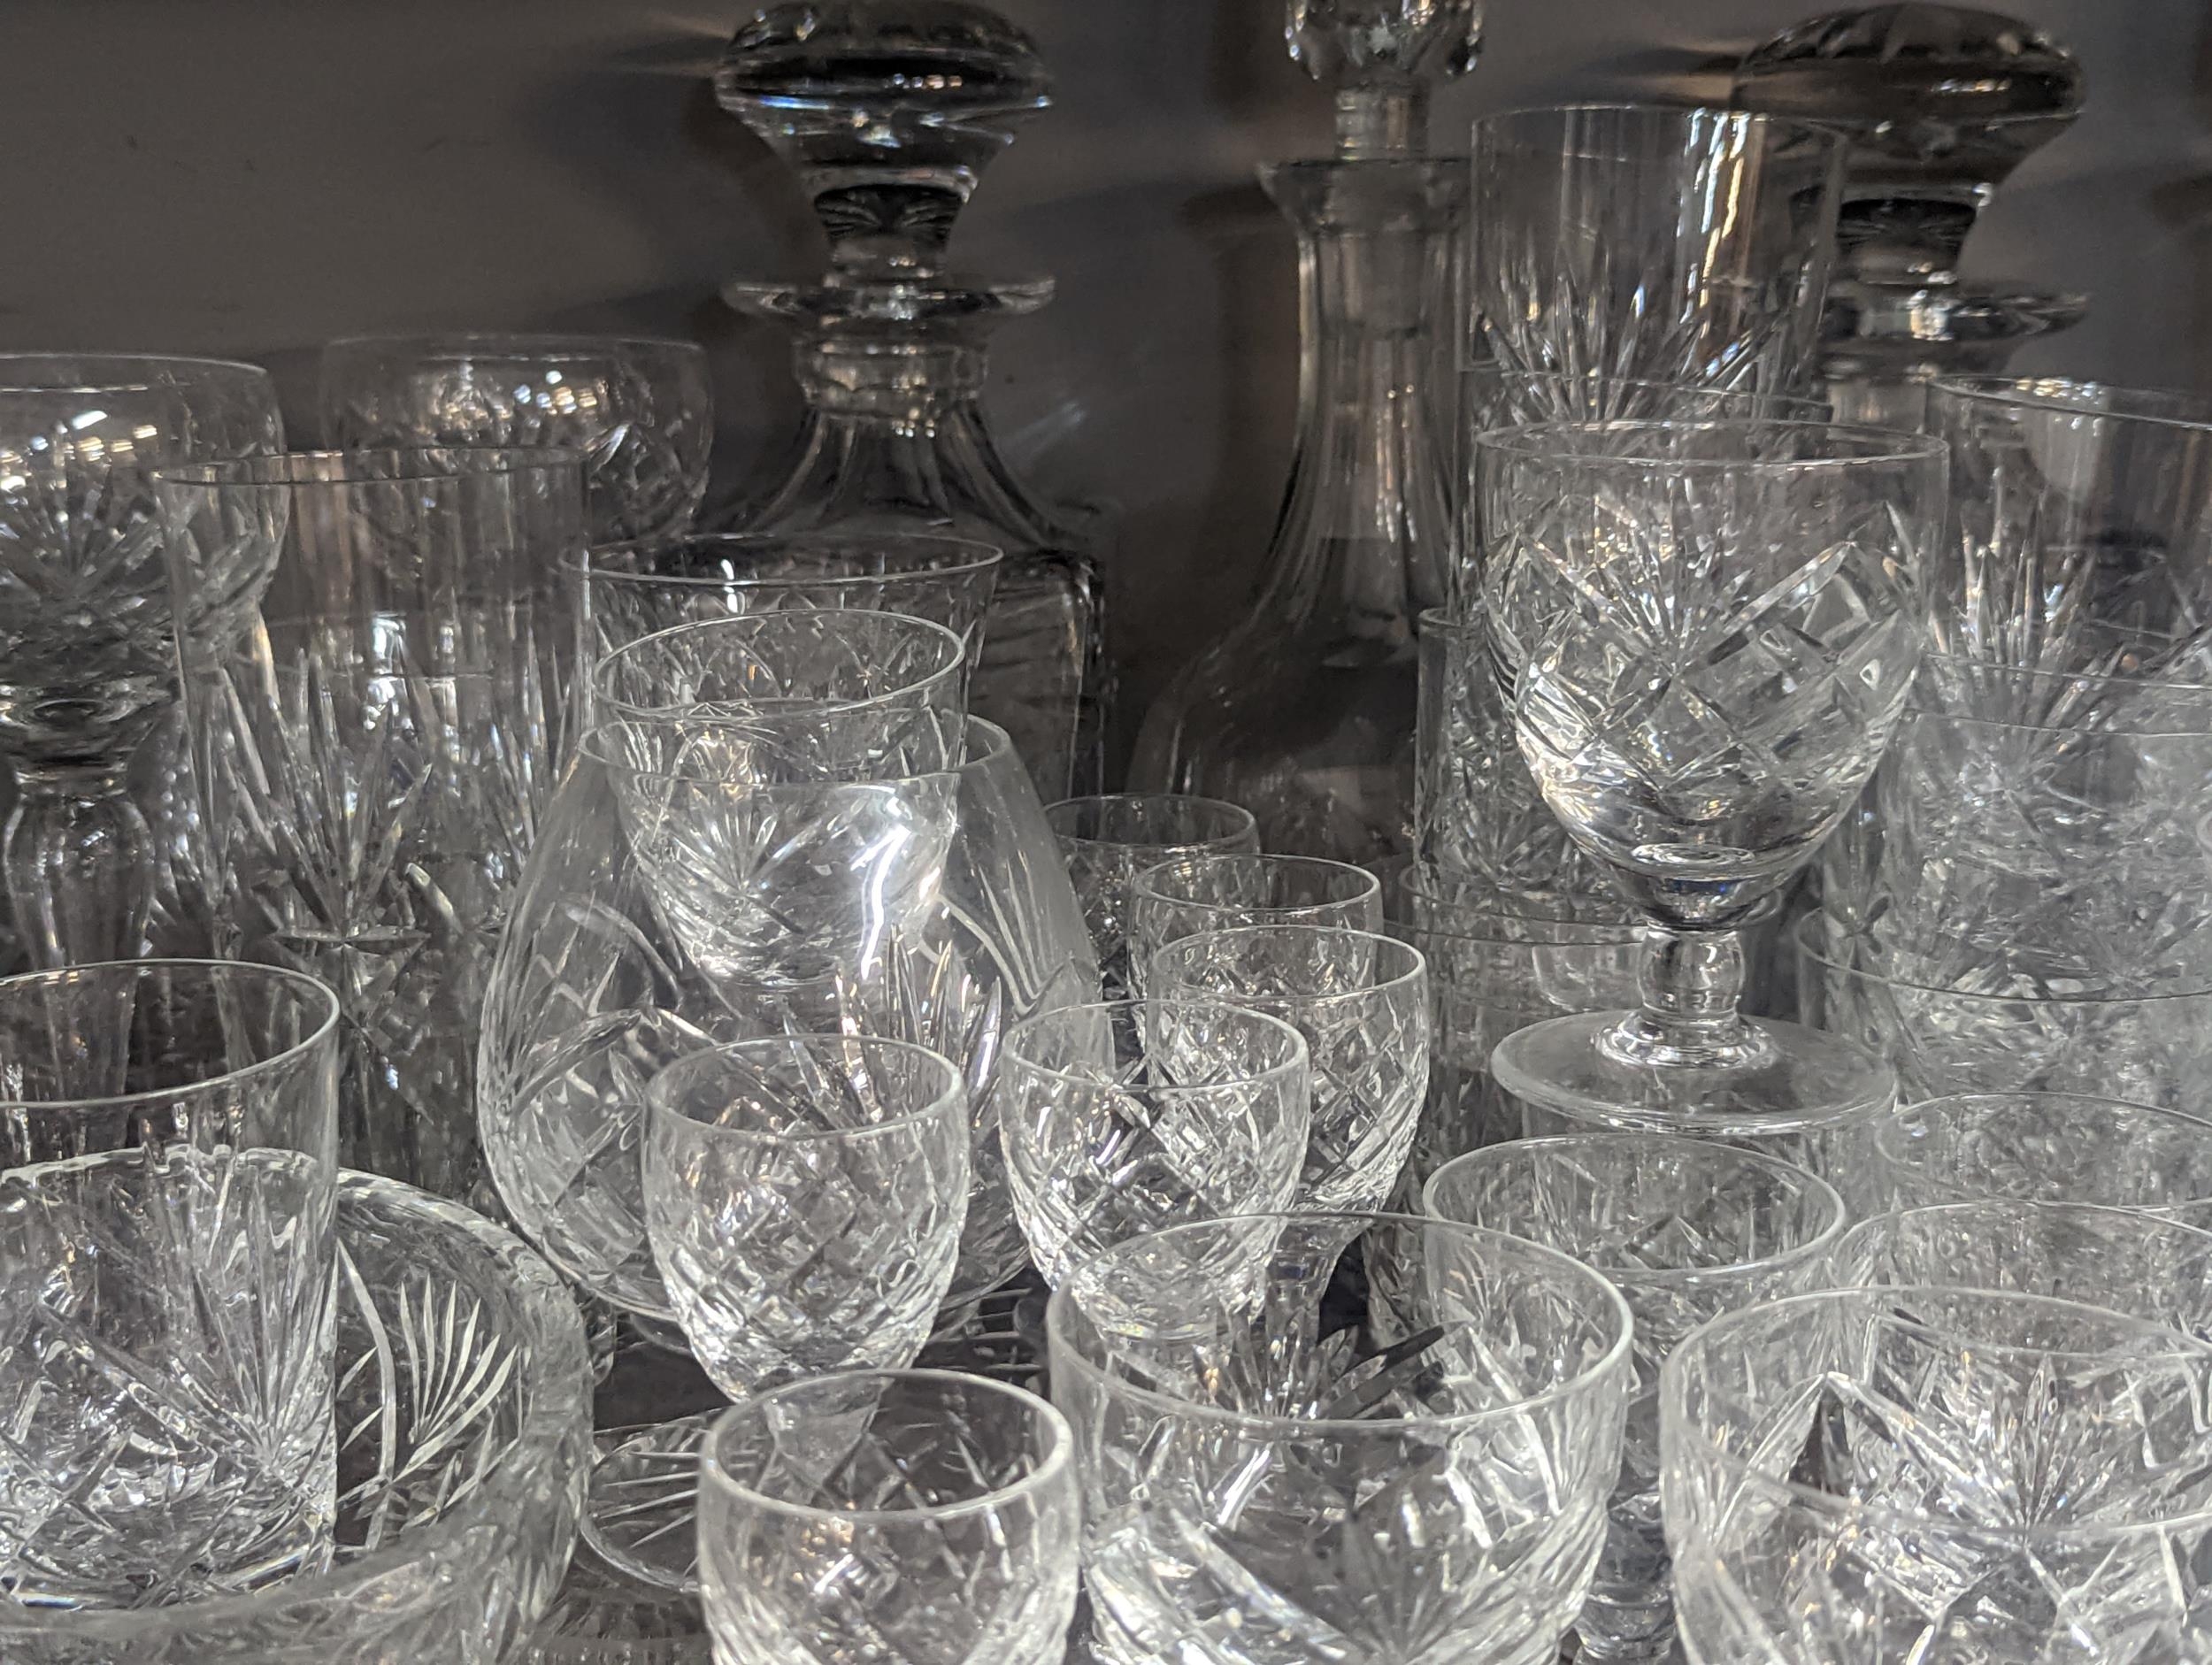 A group of domestic glassware to include cut glass decanters, cups, dishes, bowls and others - Image 4 of 5